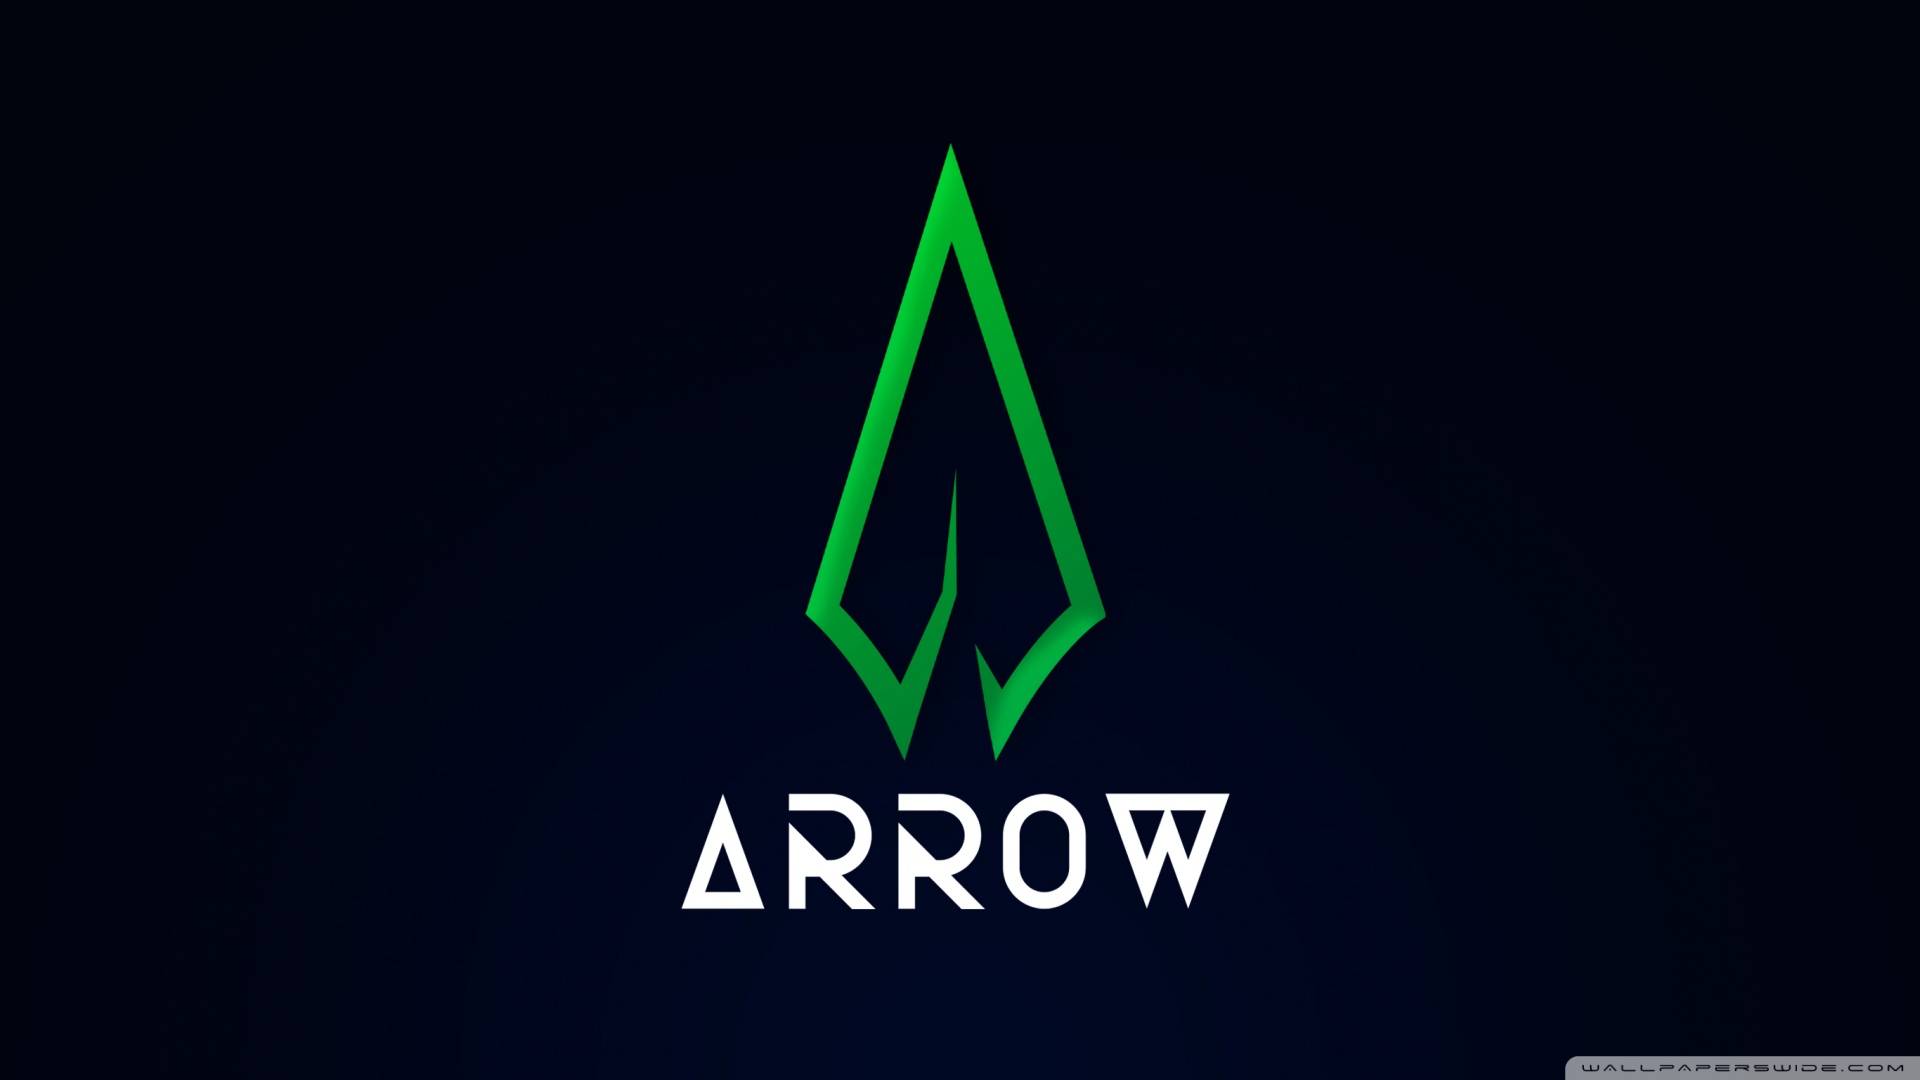 Arrow Wallpapers Images Backgrounds Photos and Pictures